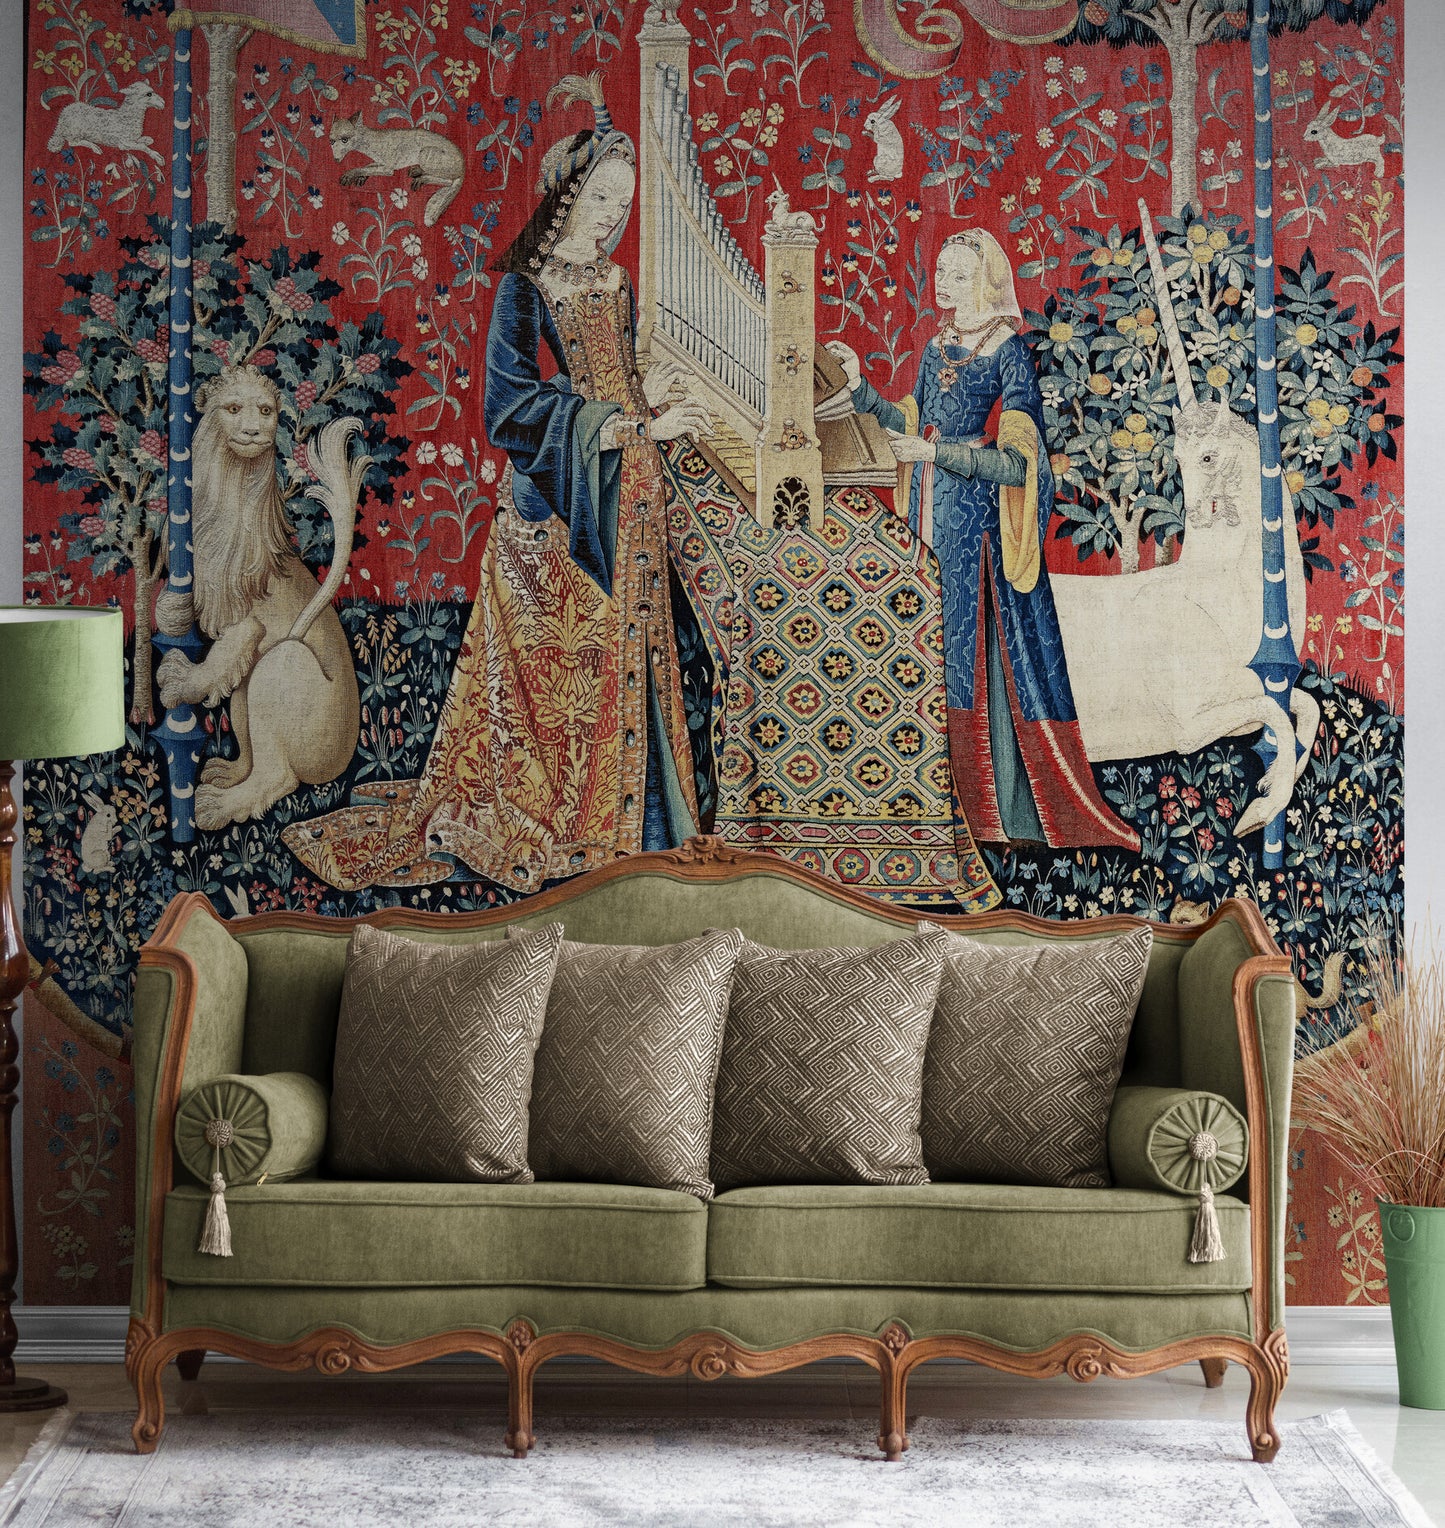 Enchanting Medieval Tapestry Lady and the Unicorn "Sound" Choice of Woven Tapestry or Fabric Print RE978887